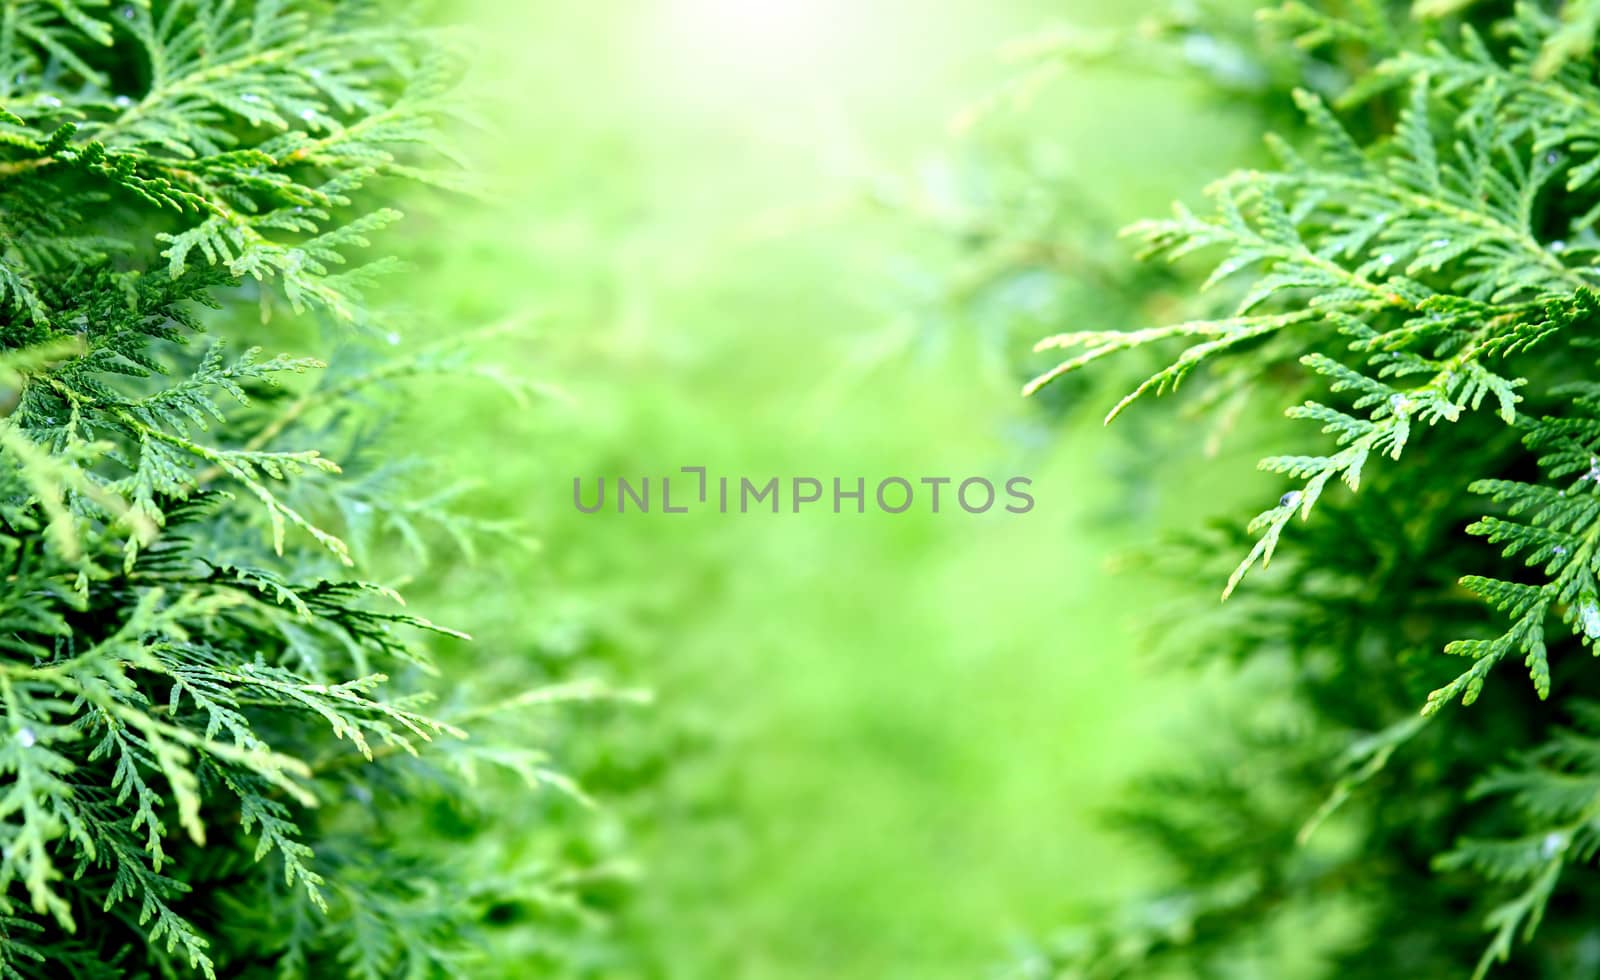 Blurred Summer green background with greenery foliage